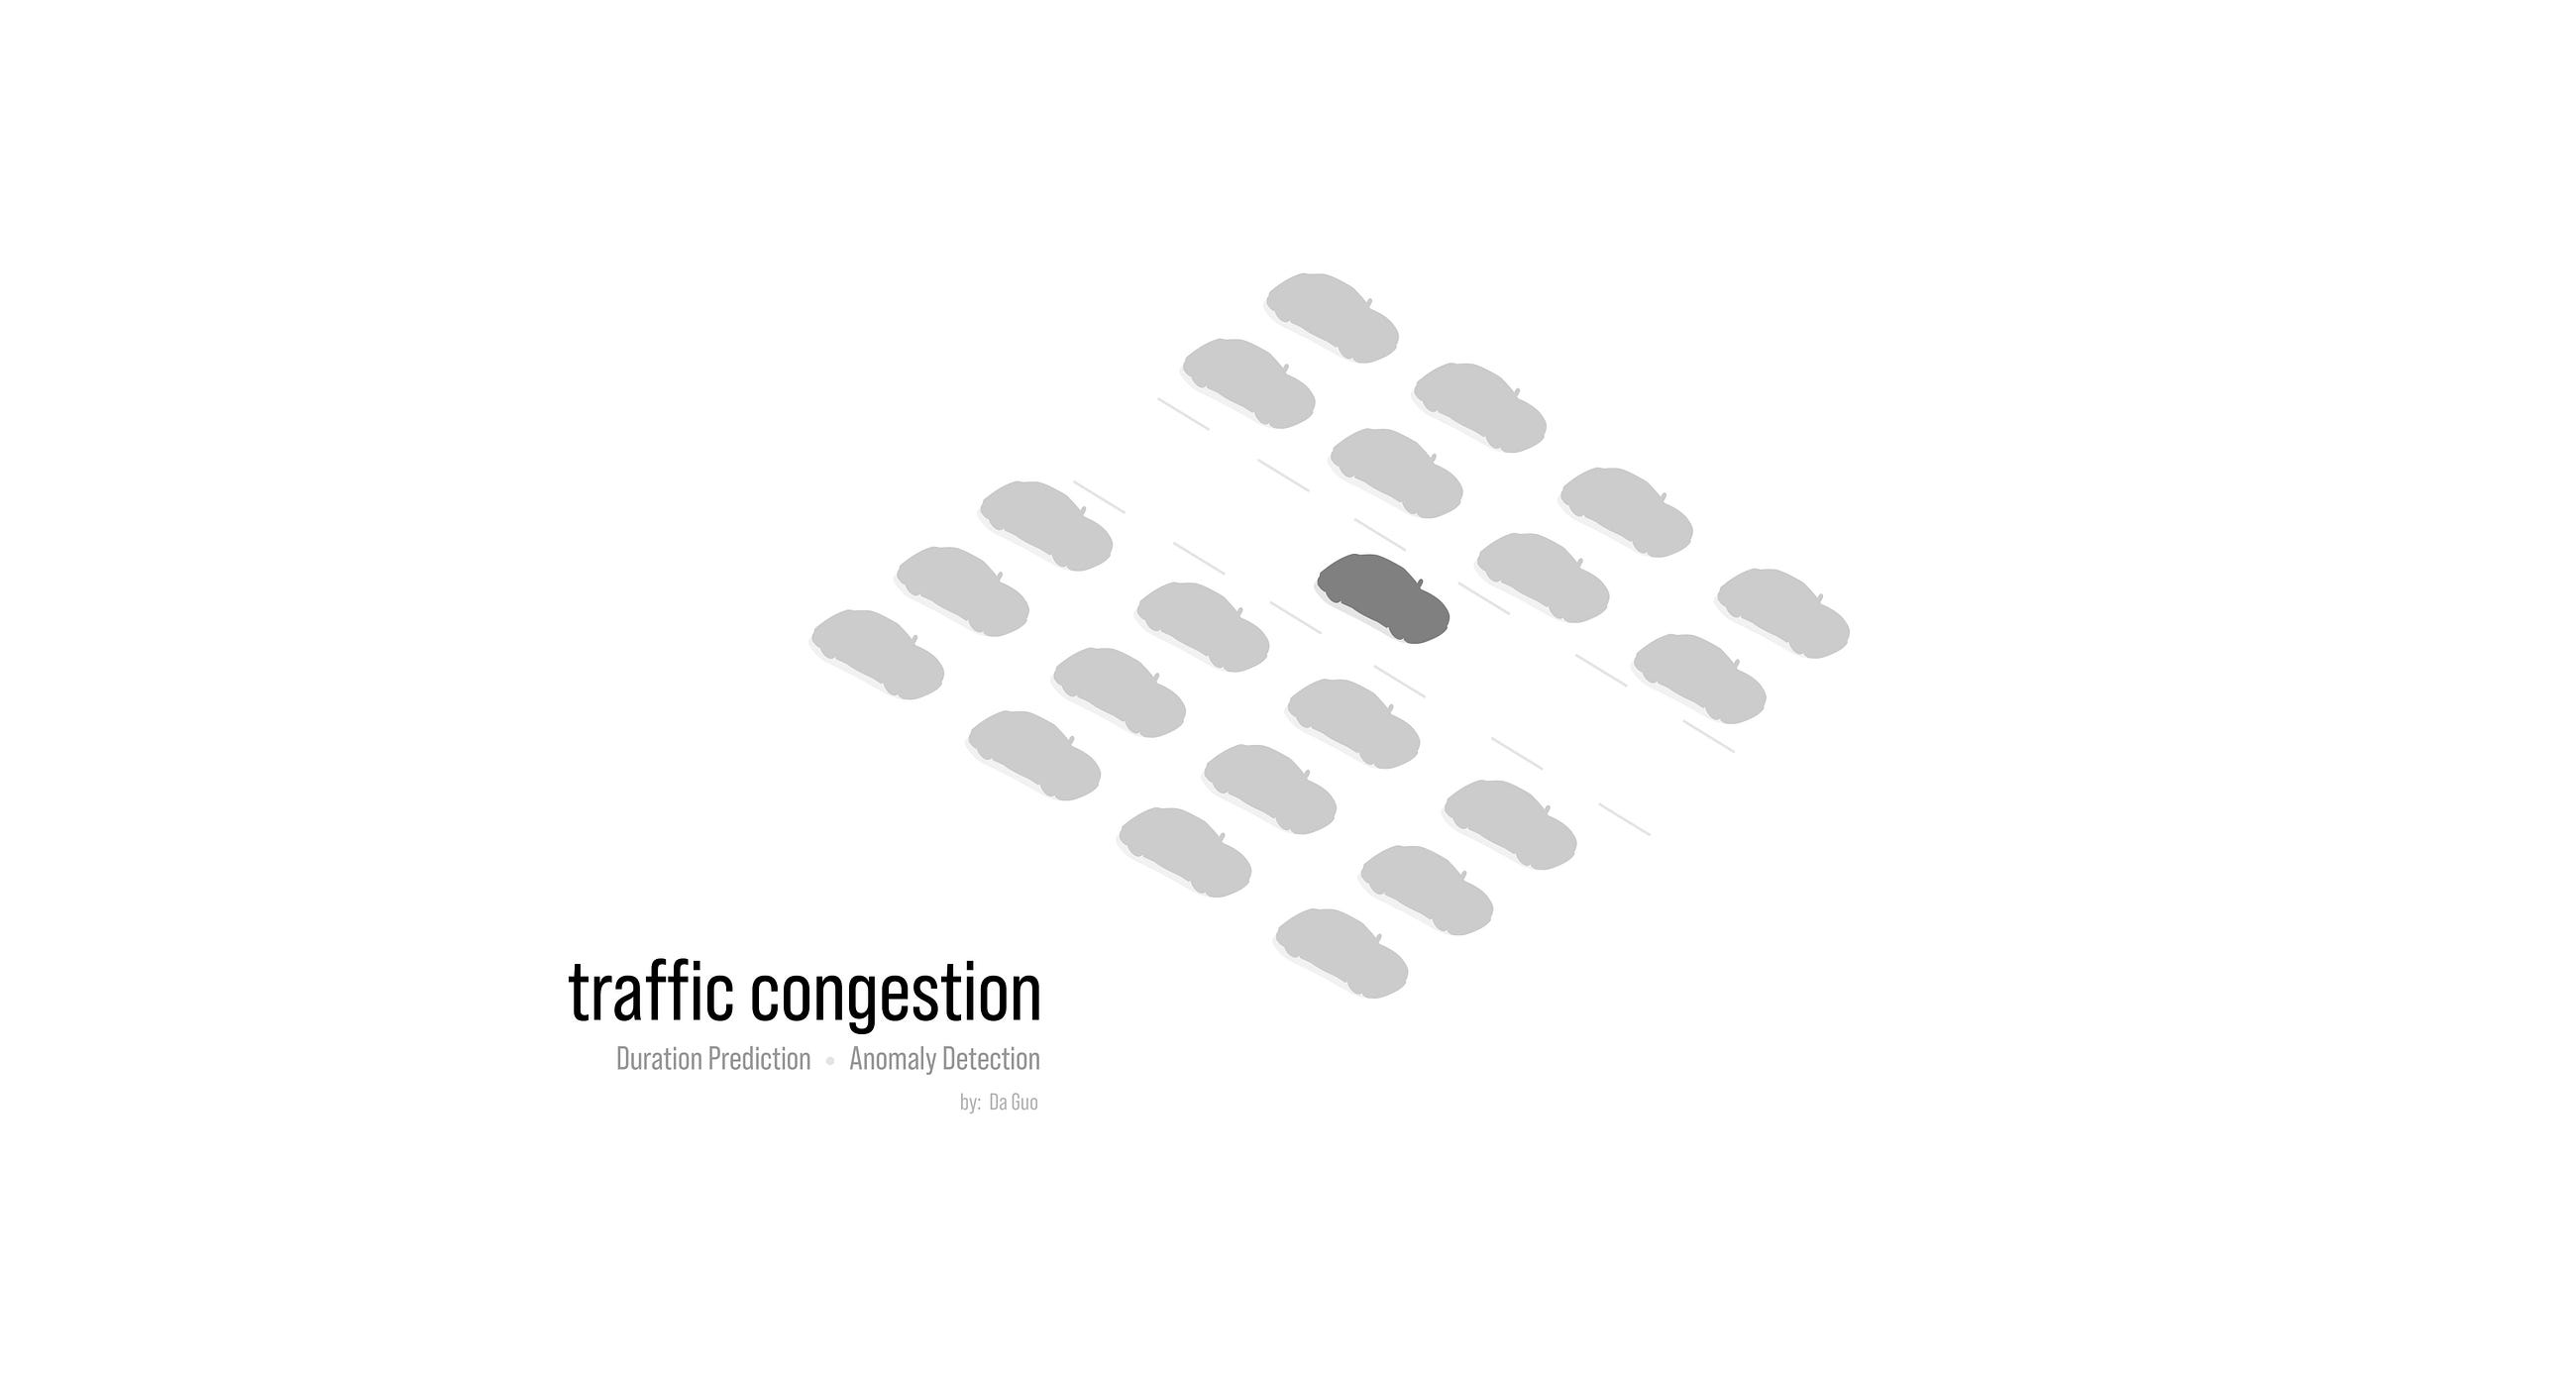 Predicting and Detecting Traffic Congestion Duration Anomalies